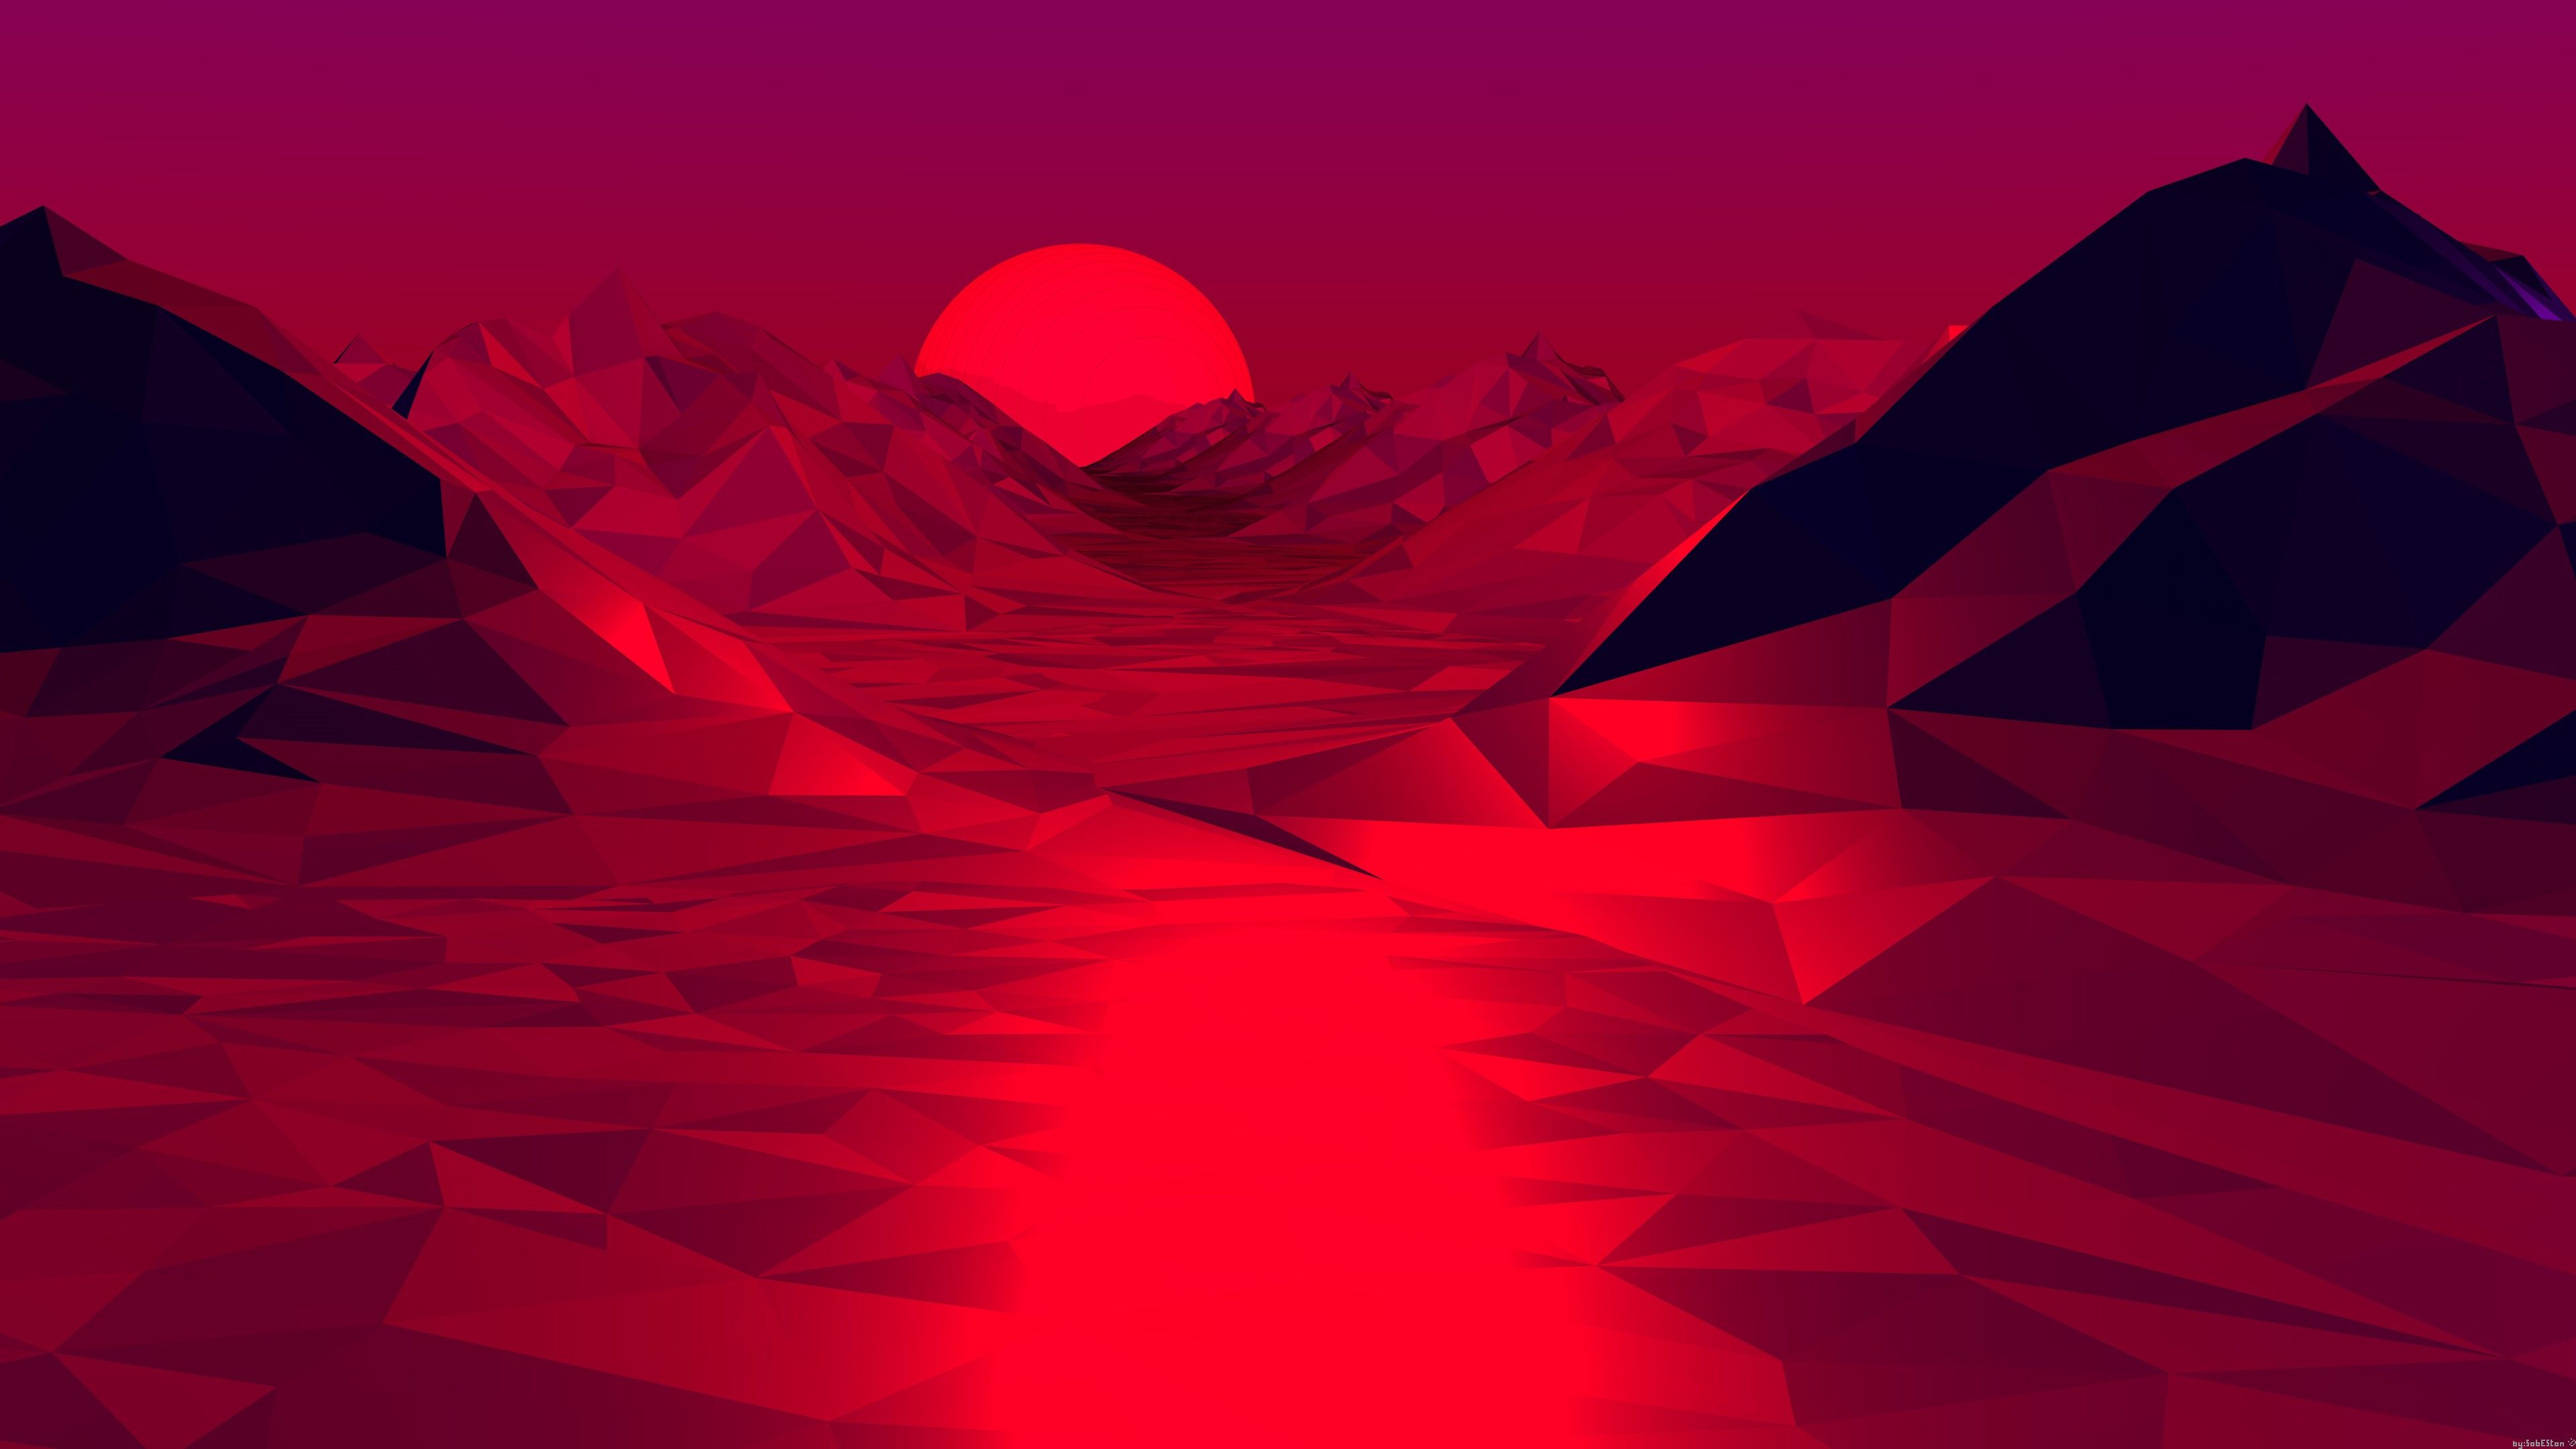 Wallpaper / low poly, abstract, 3D, red, hd, 4k, digital art free download